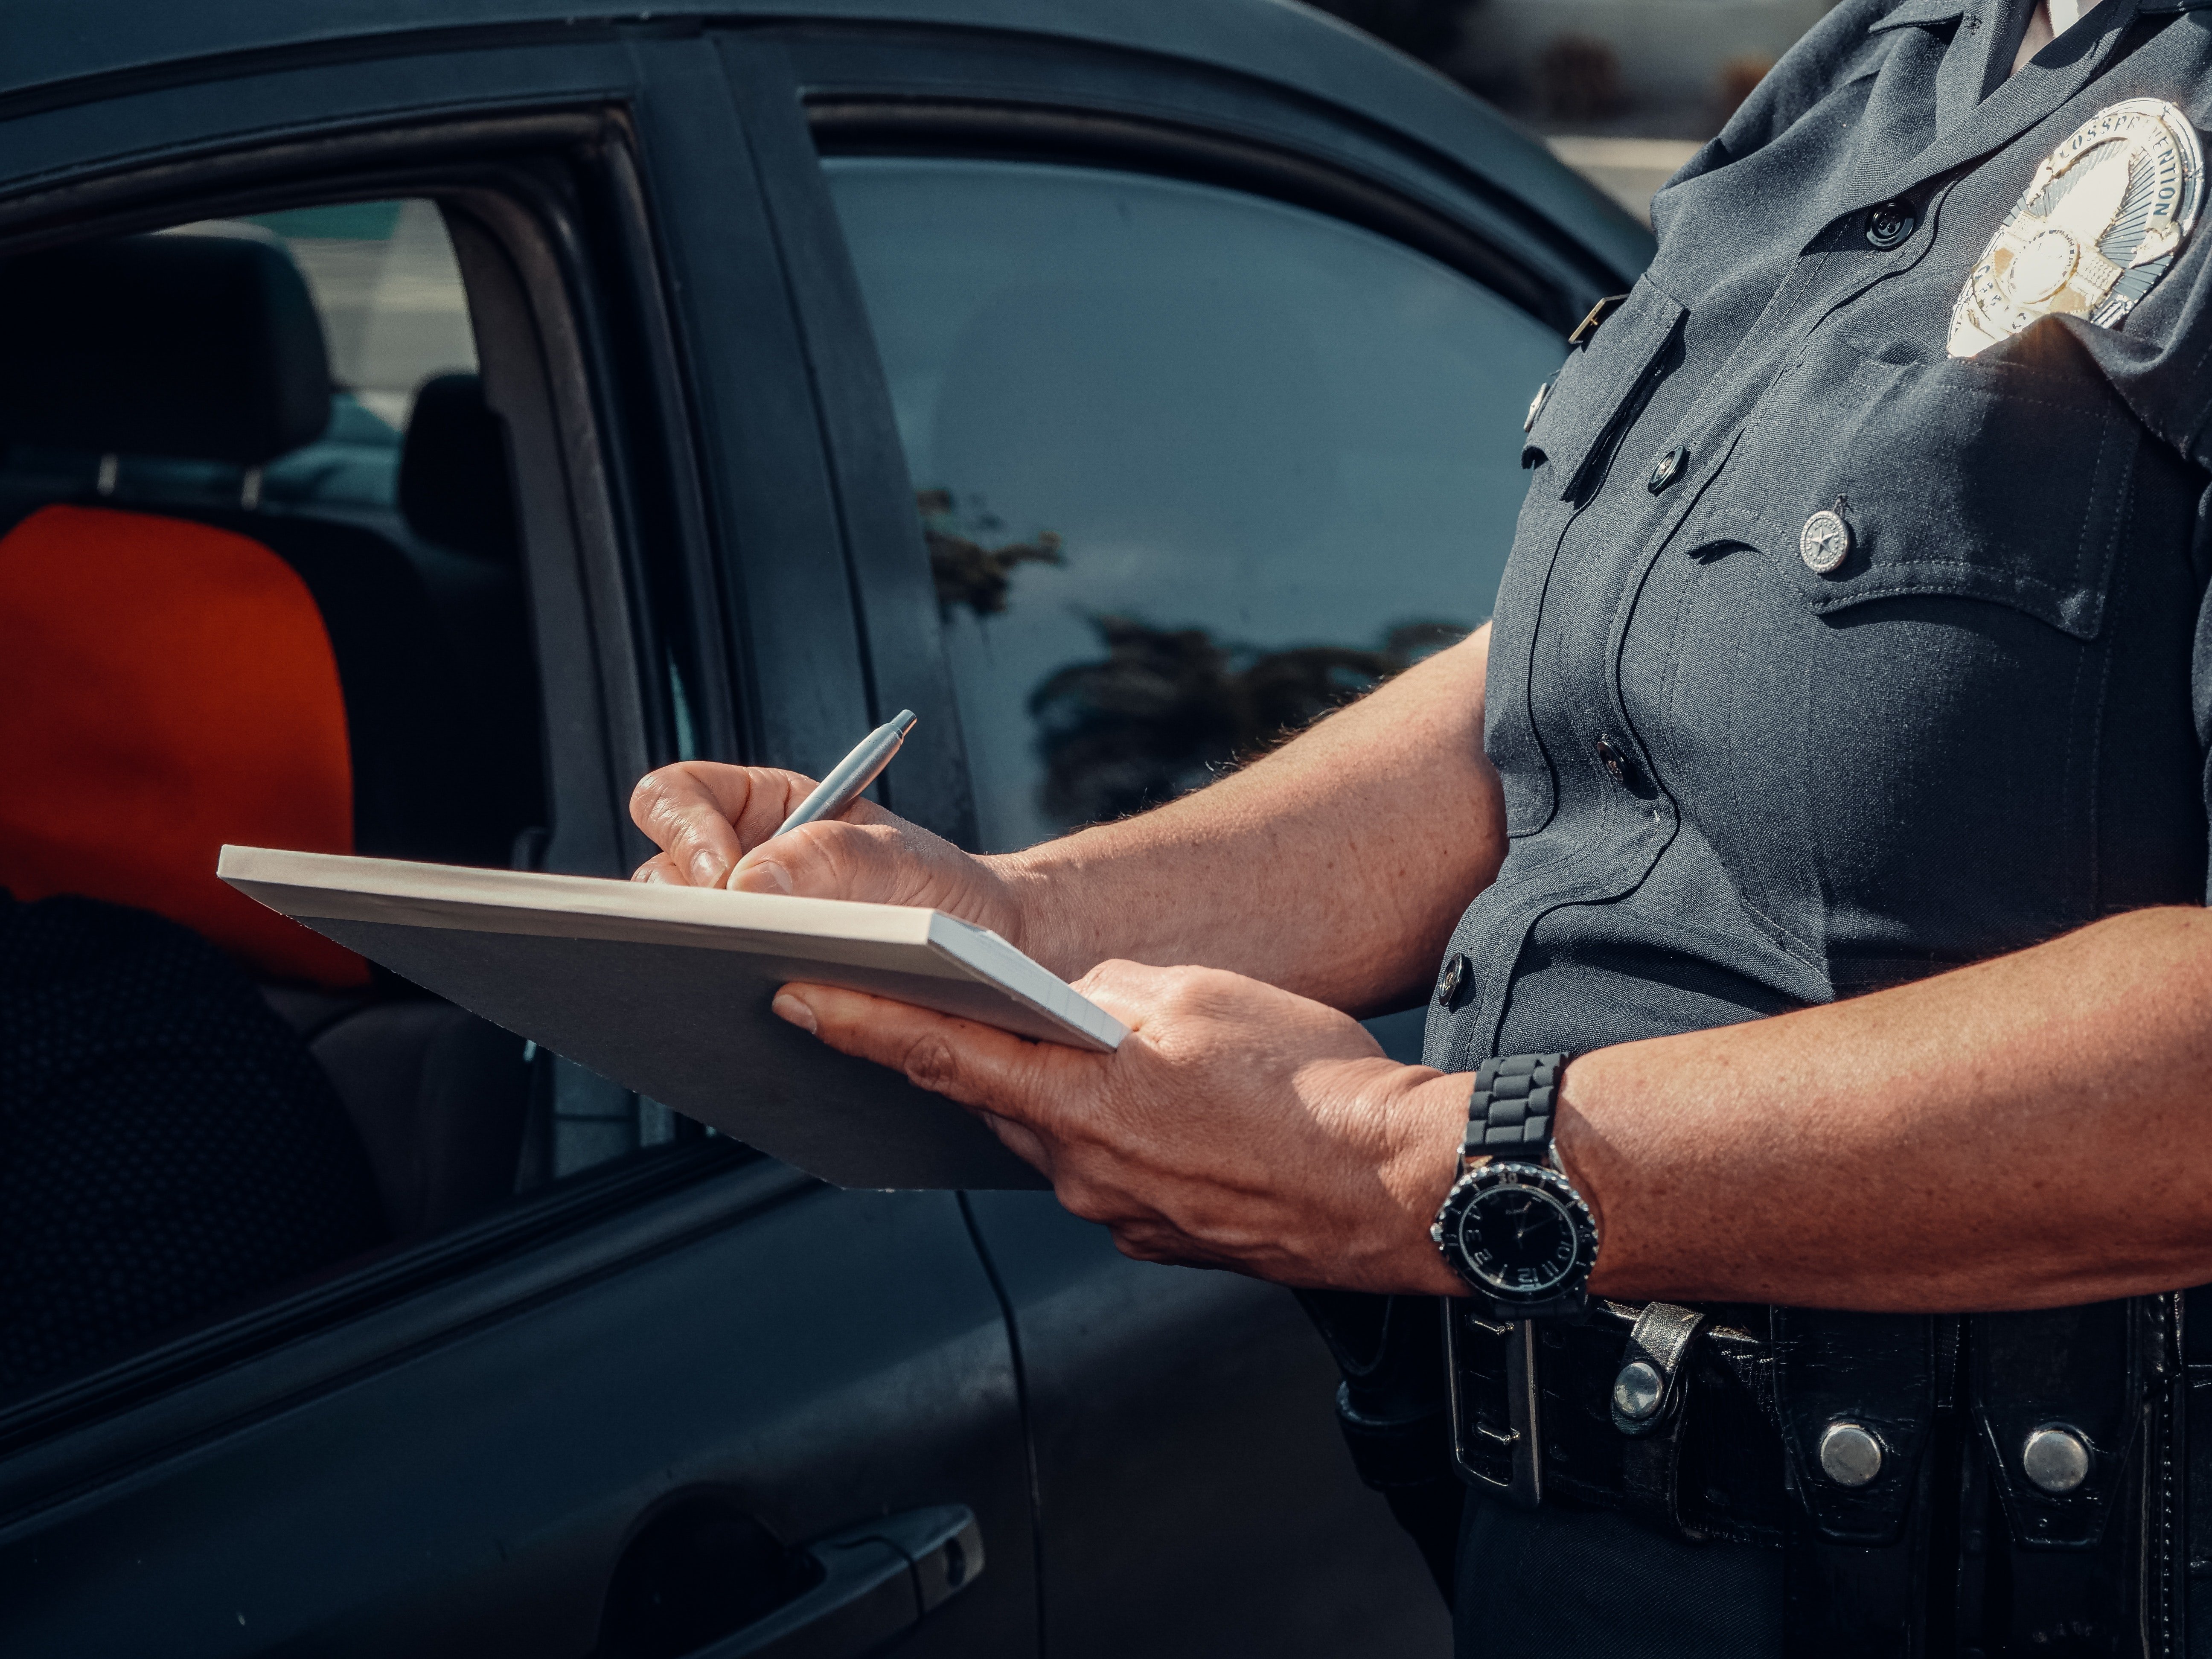 A police officer brings a driver to book and writes them a fine | Photo: Pexels/Kindel Media